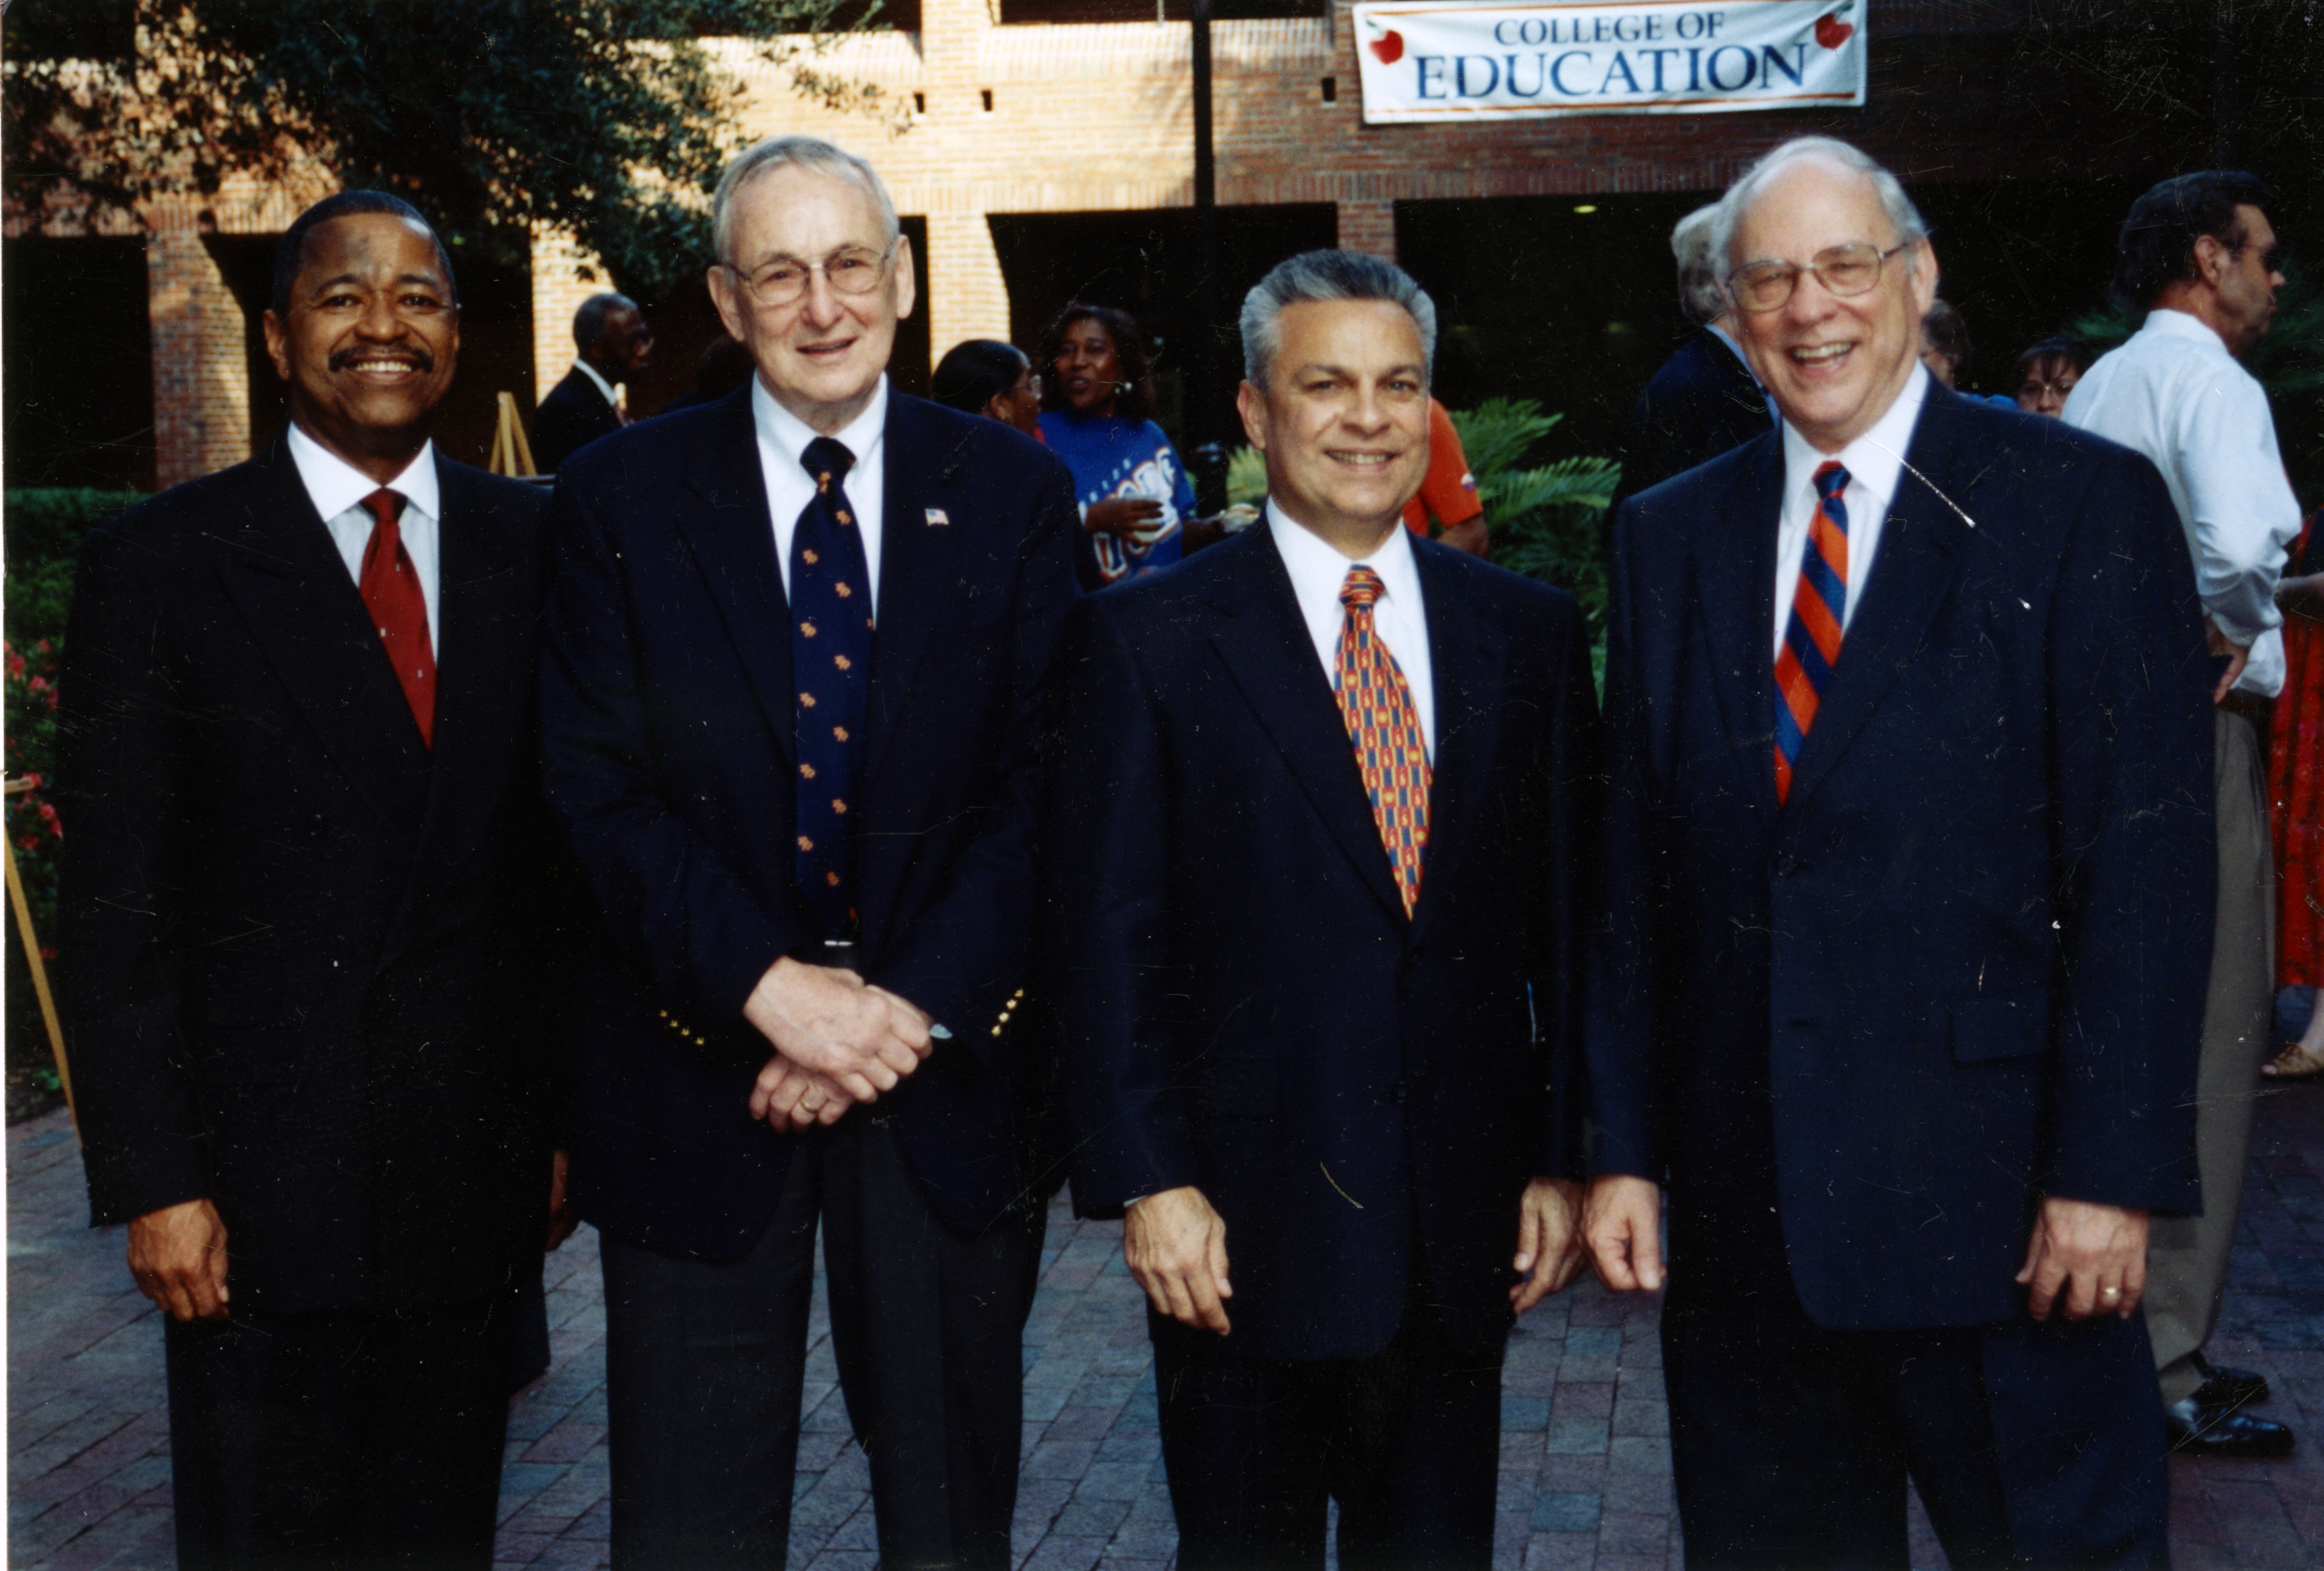 Gonzalez attended a UF ceremony honoring College of Education deans (from left) Roderick J. McDavis, David C. Smith, Gerardo, and Ben F. Nelms.